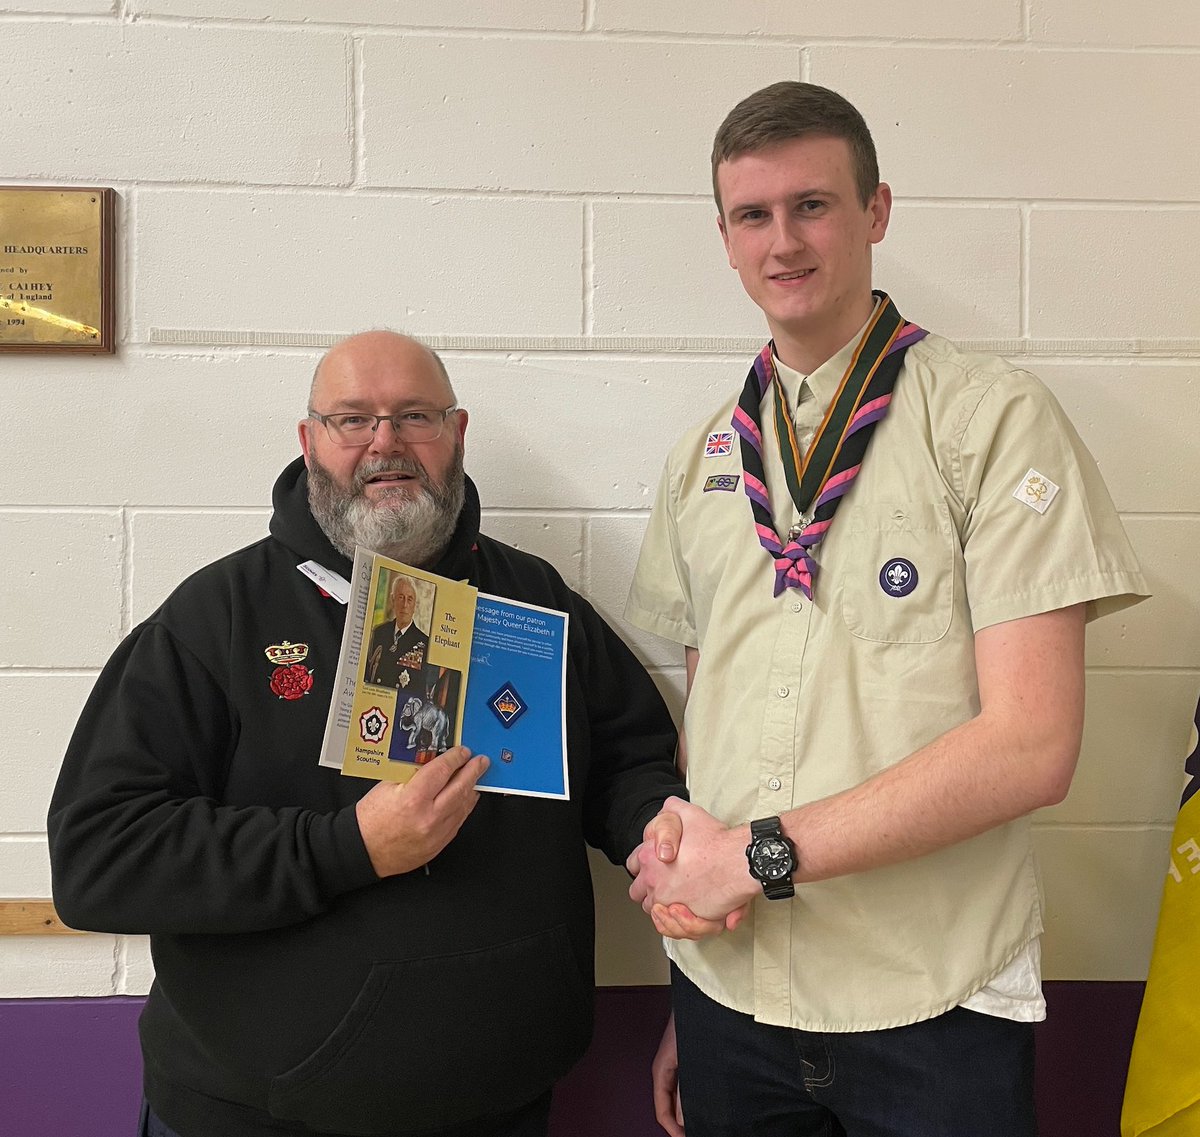 Huge congratulations to Jack Dilley from Basingstoke Scouts who was presented his Queens Scout Award last night! 👏 #Achievement #QSA #SkillsForLife